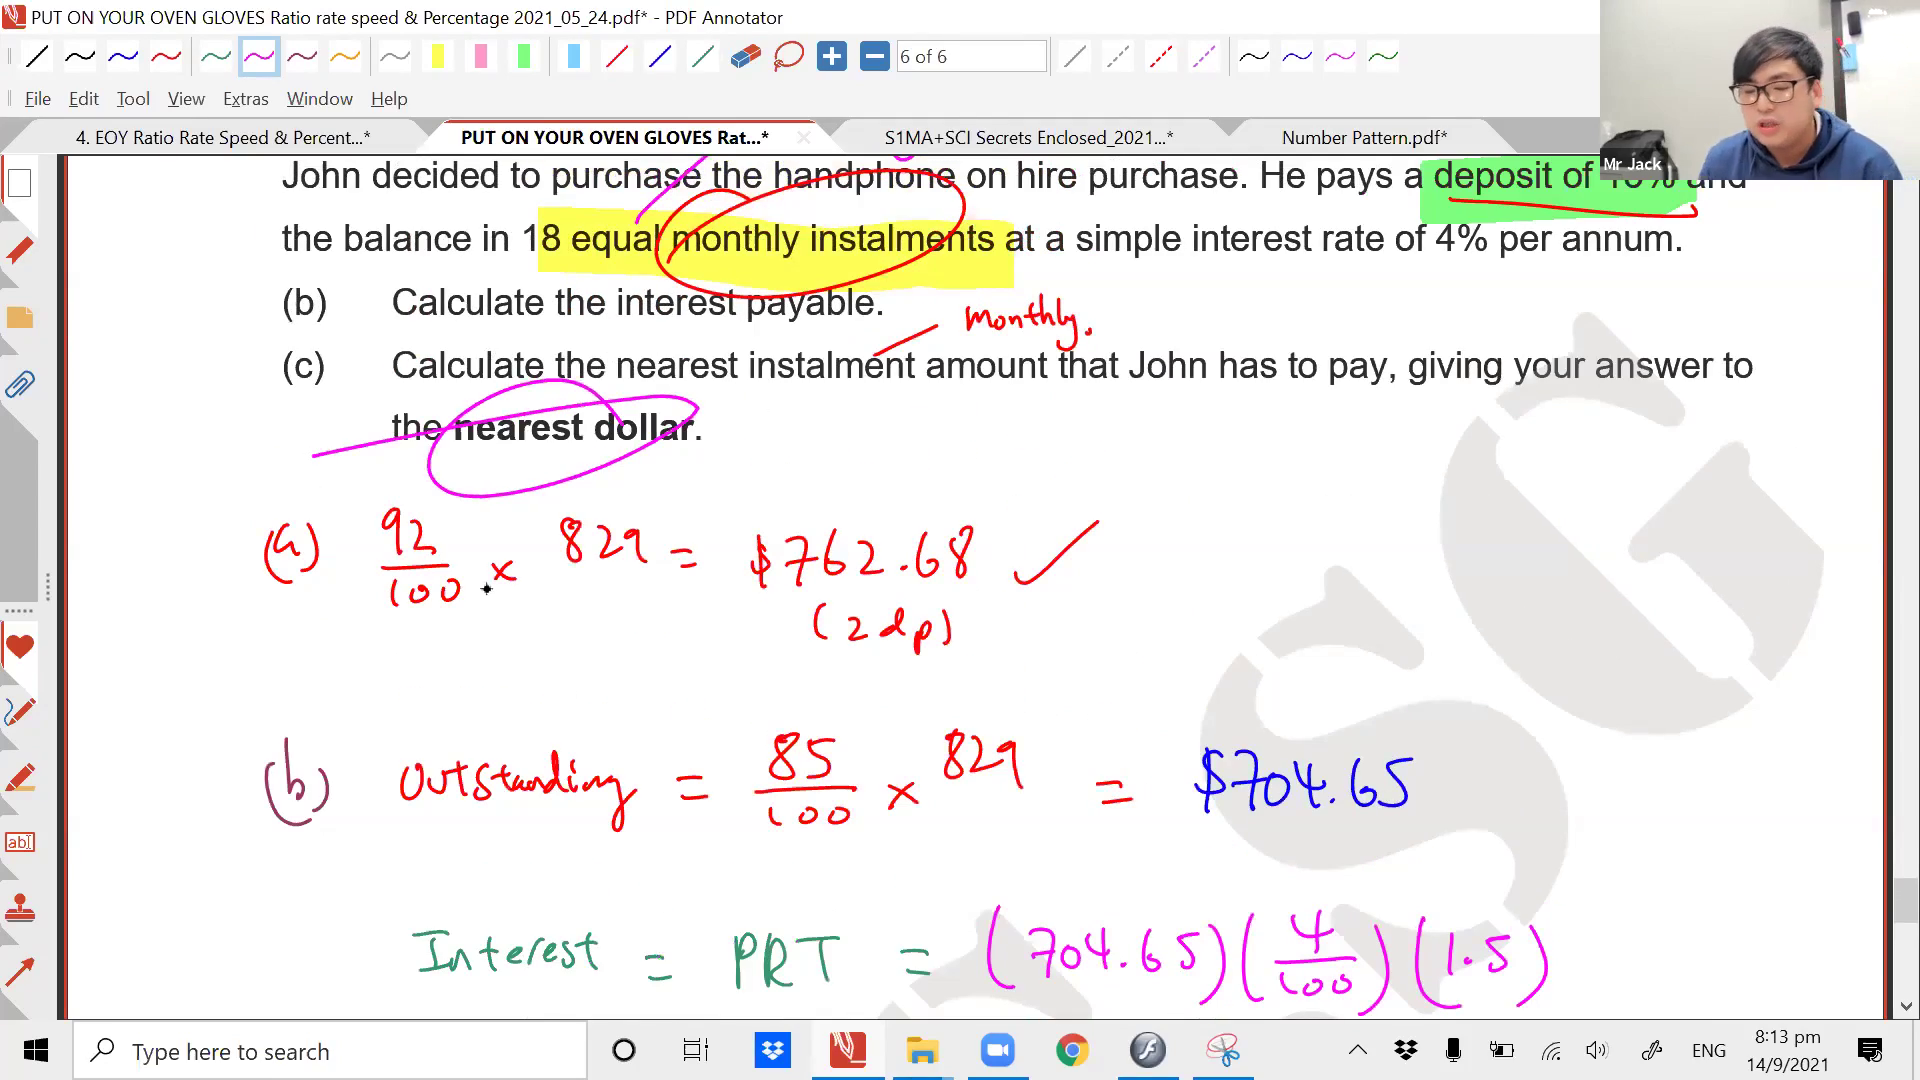 [PERCENTAGE & ARITHMETIC PROBLEMS] Hire Purchase